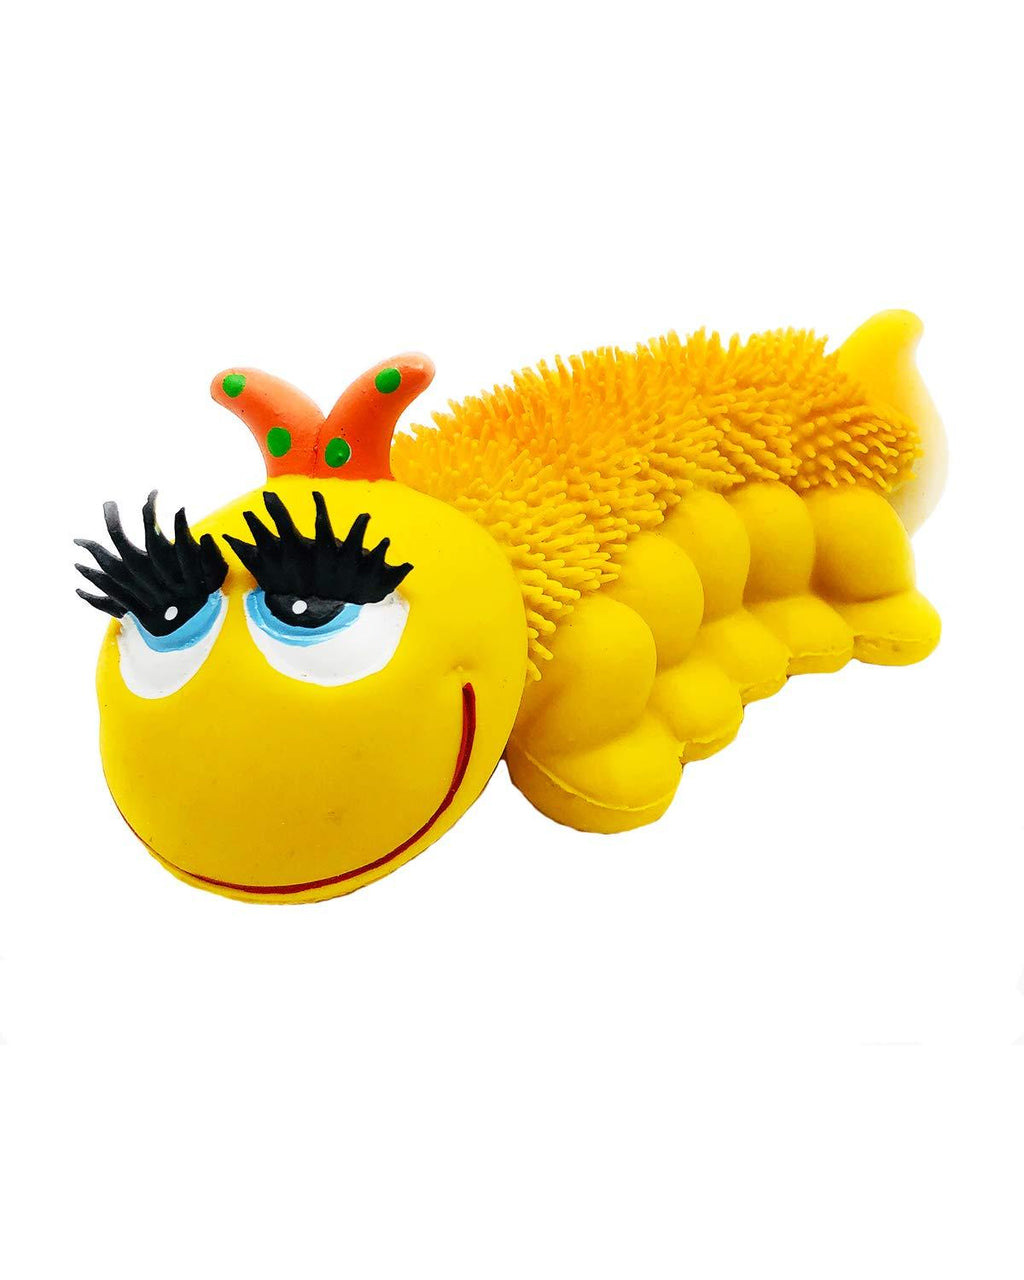 [Australia] - Sensory Caterpillar - Squeaky Dog Toys - Soft, Natural Rubber (Latex) - for Puppies, Small Dogs & Medium Dogs - Complies with Same Safety Standards as Children’s Toys 